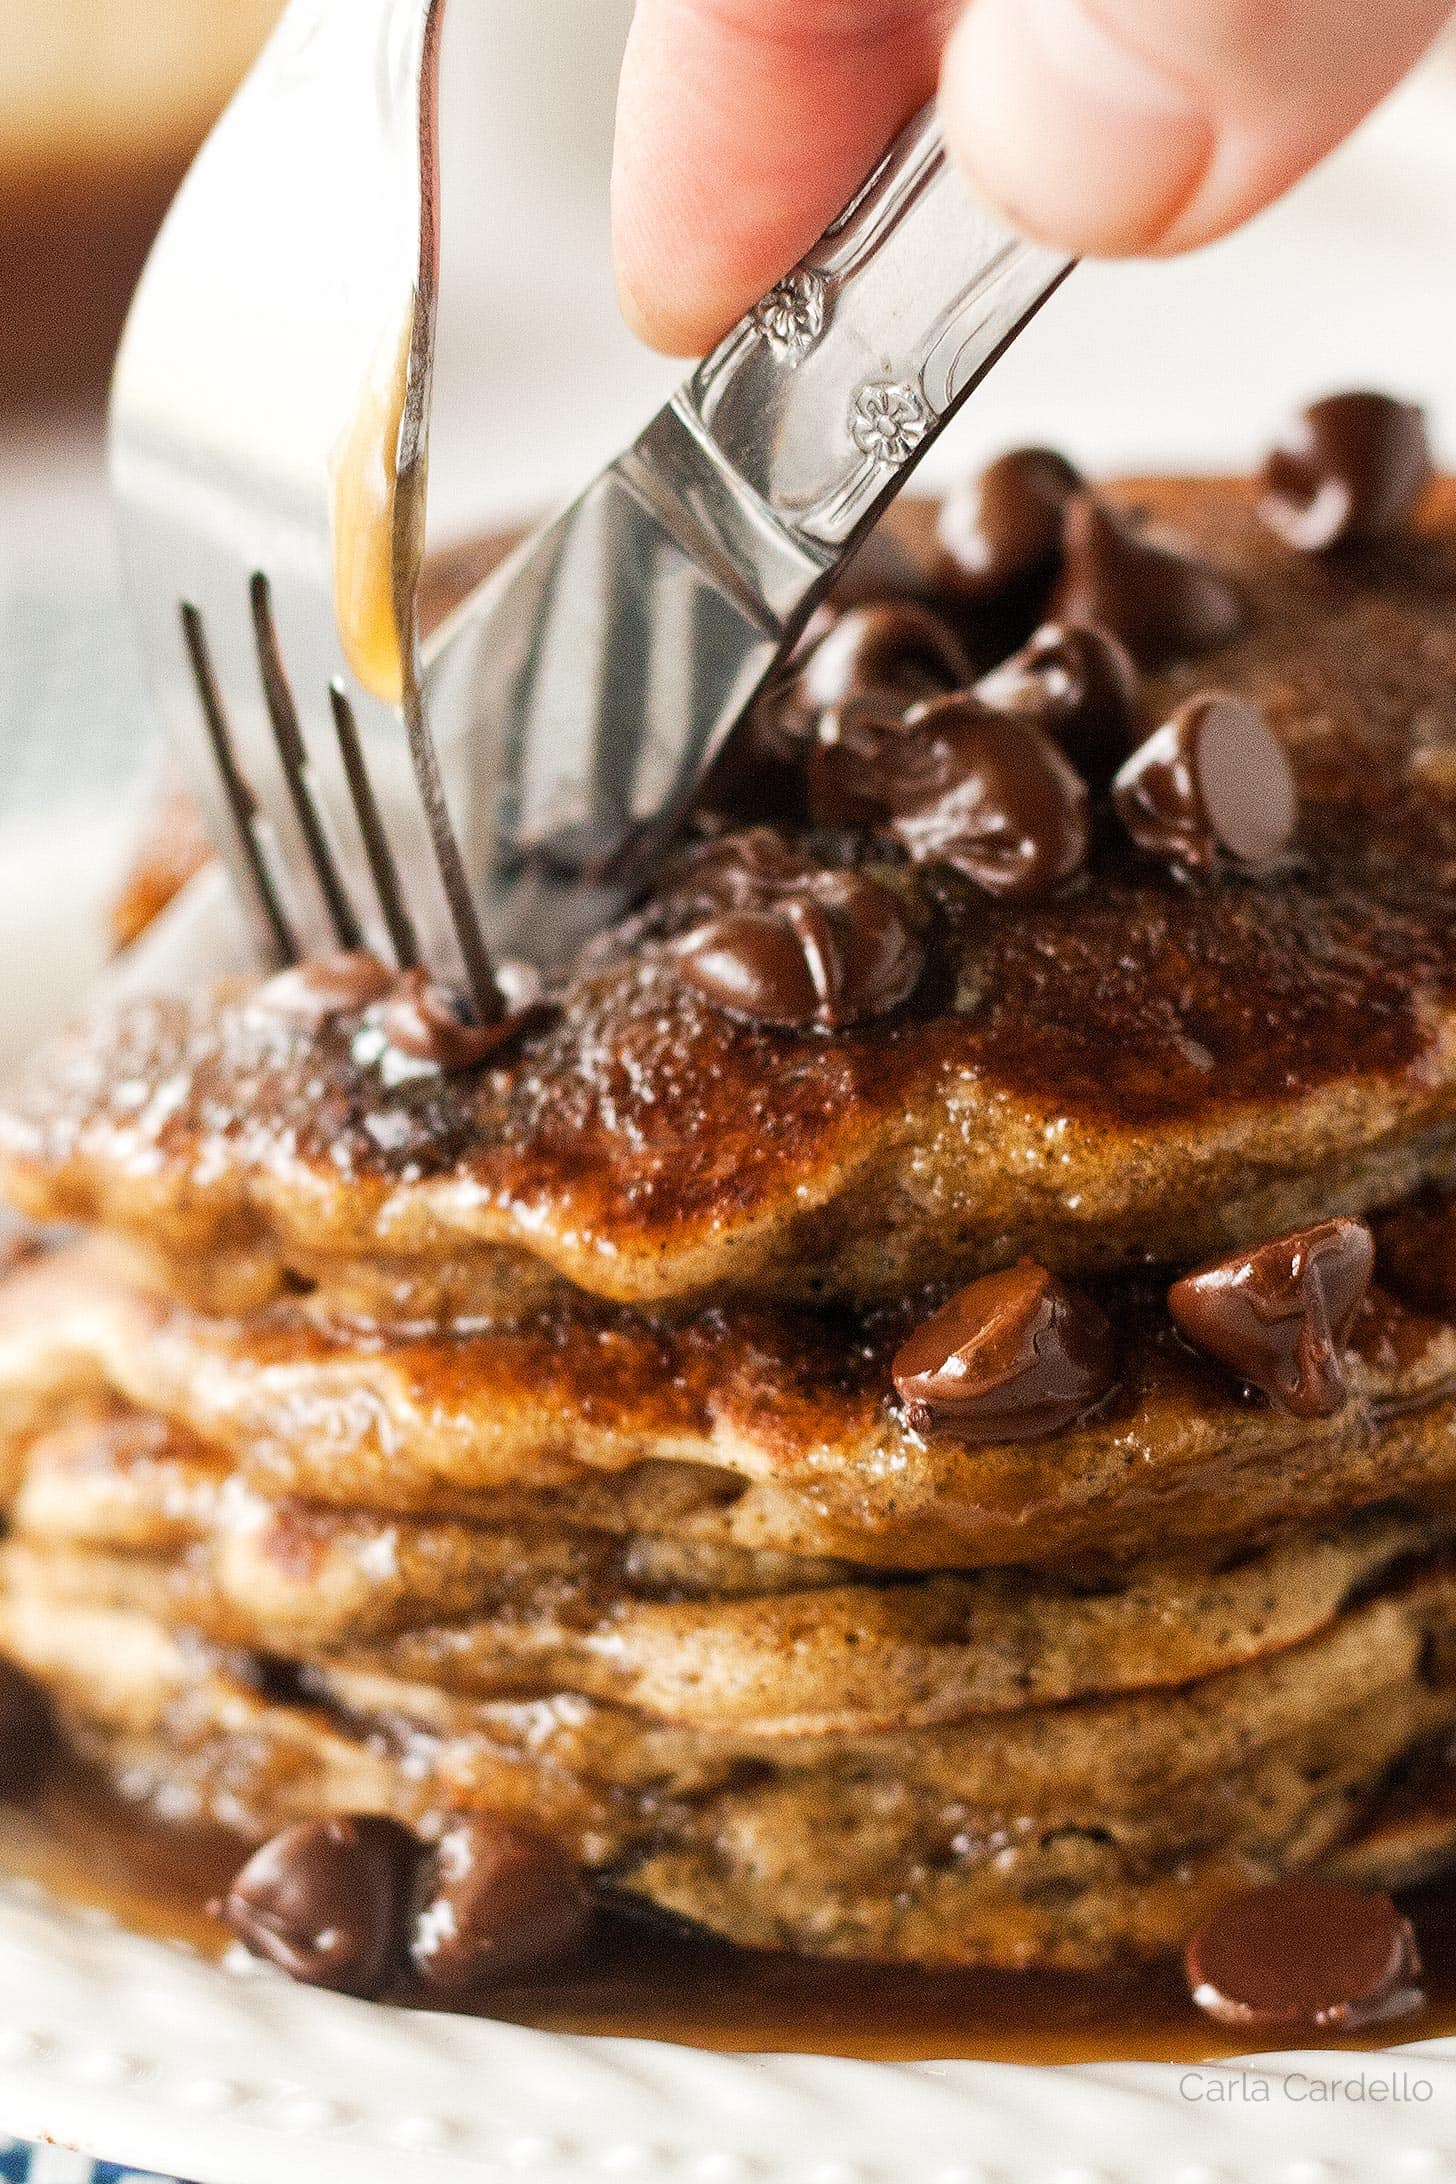 Fork and knife cutting chocolate chip pancakes